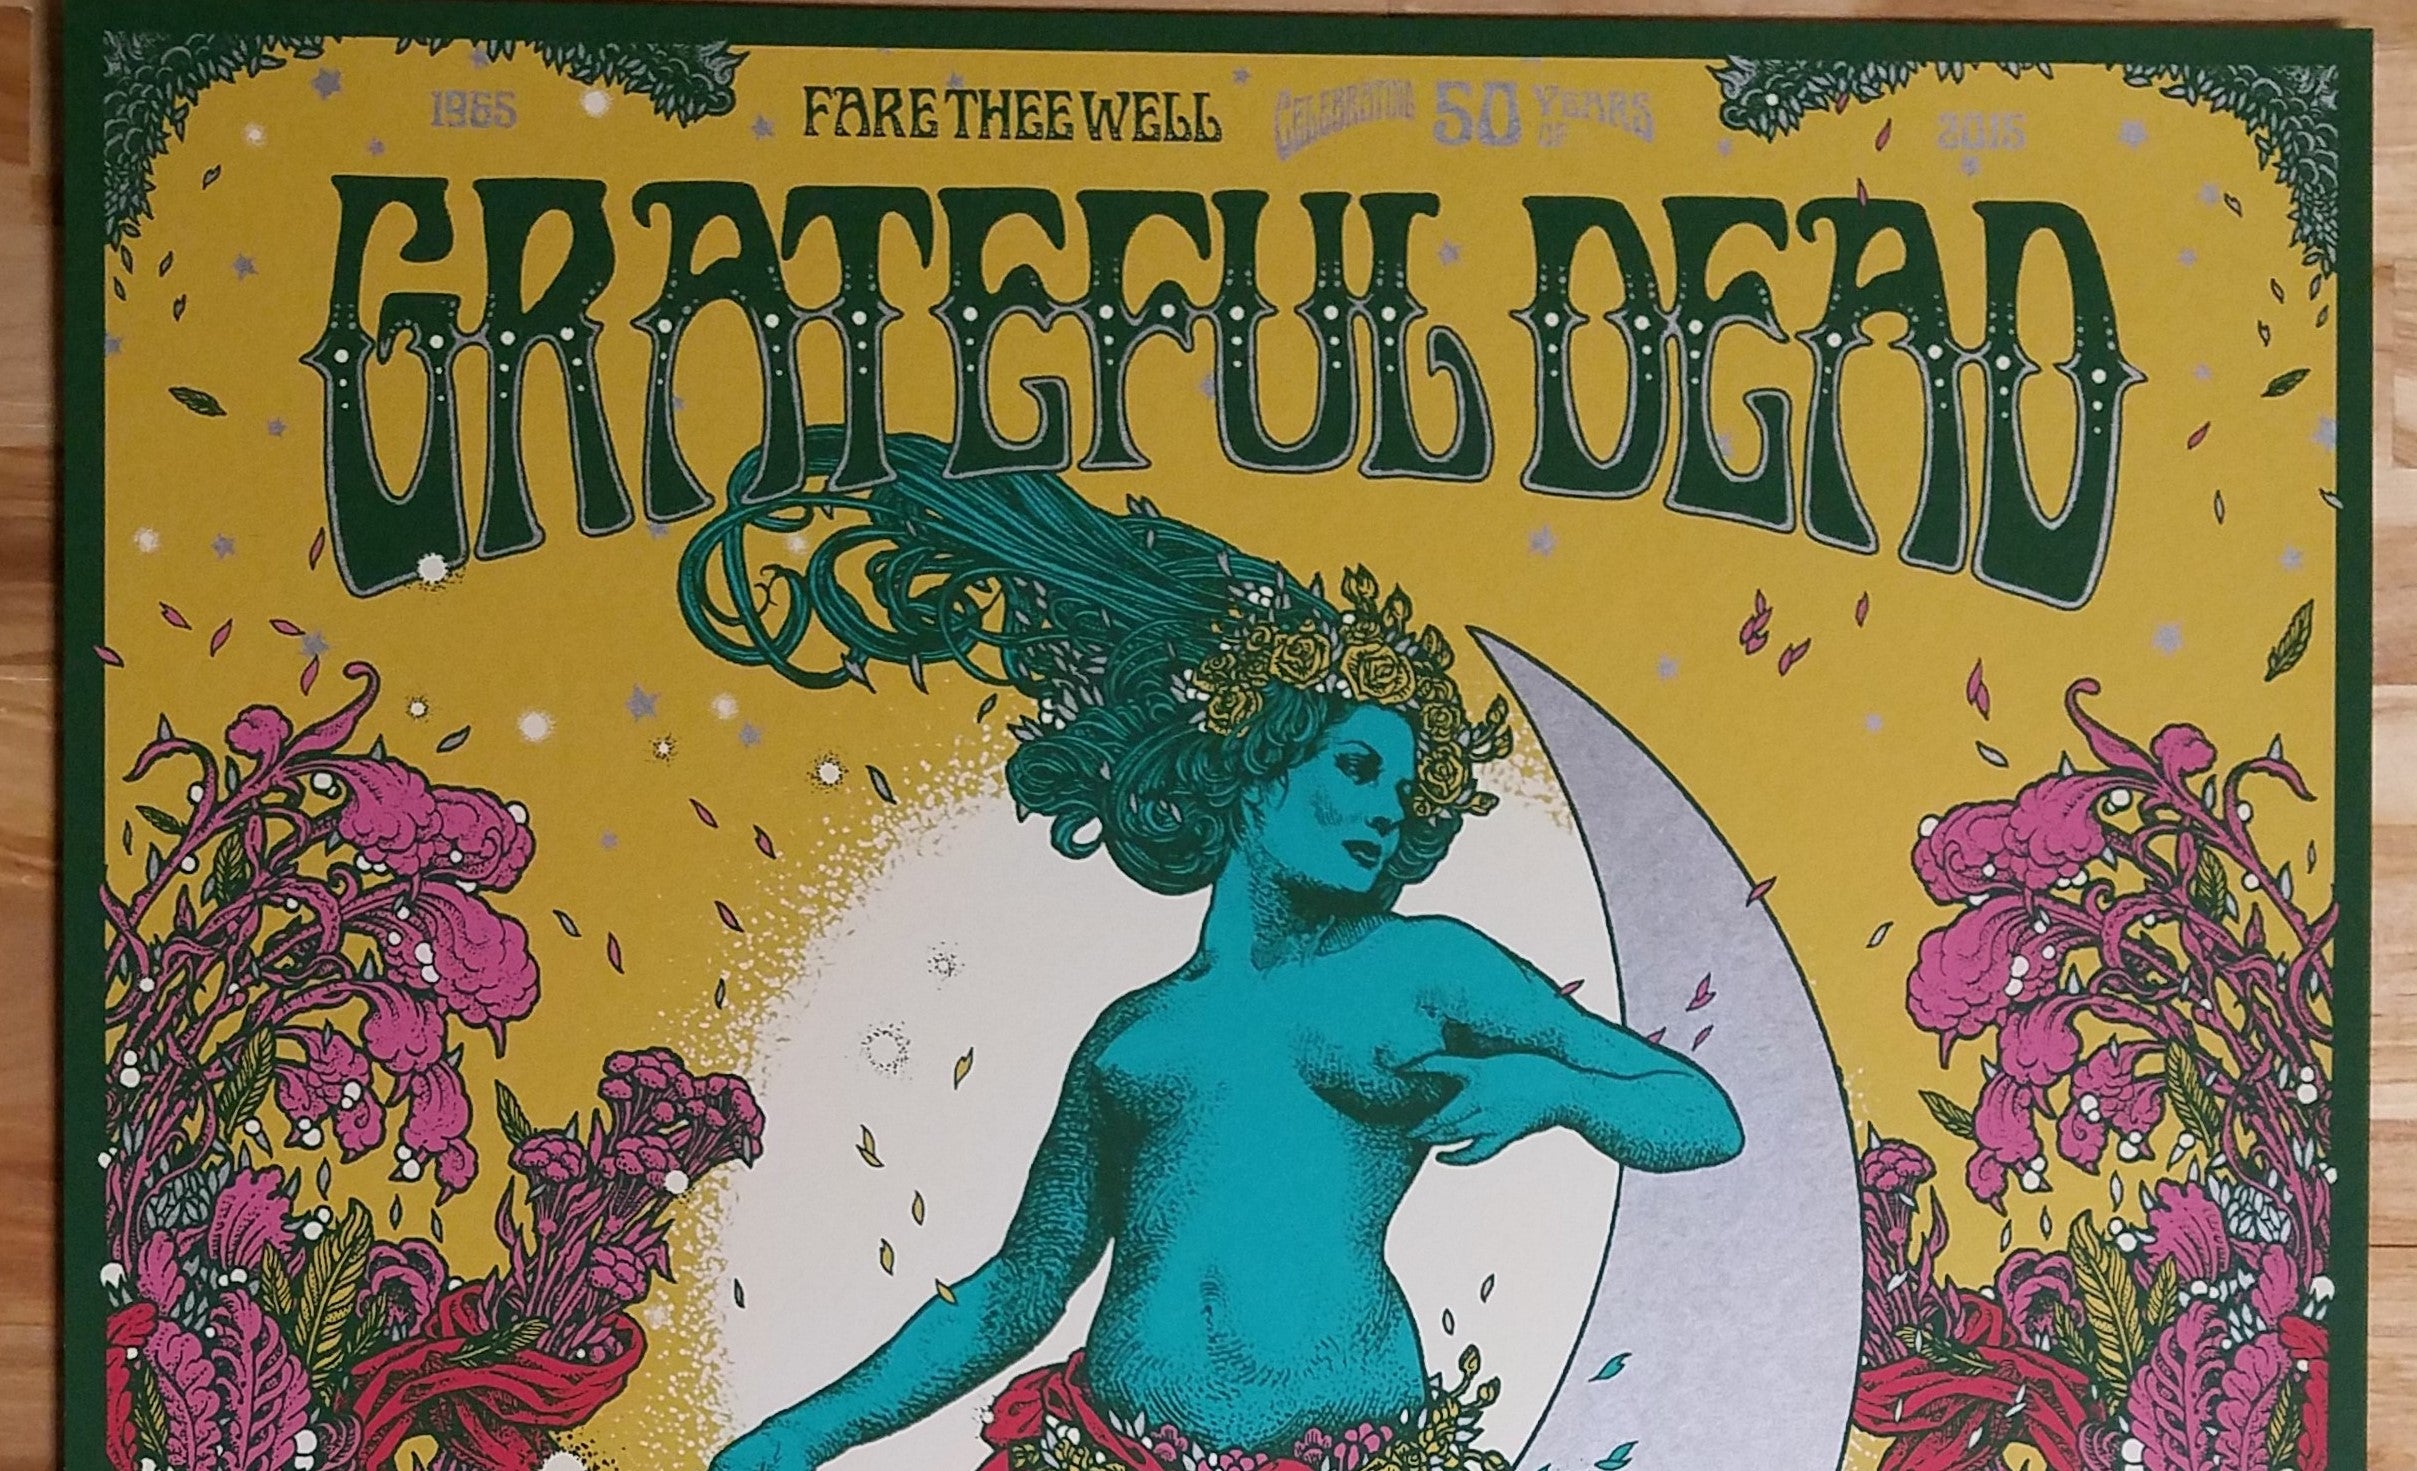 Title:  Grateful Dead - Fare Thee Well  Artist:  Richey Beckett  Edition:  Released at their July 3rd, 4th and 5th 2016 shows, signed and numbered artist edition  Type:  Screen printed poster  Size:  18 "x 24"  Venue:  Soldier Field  Location:  Chicago, IL  Notes:  Print is stored flat in very good condition. Following purchase, prints are rolled in archival paper and shipped with bubble wrap in sturdy cardboard tubes.  Check out our other listings for more hard-to-find and out-of-print posters.